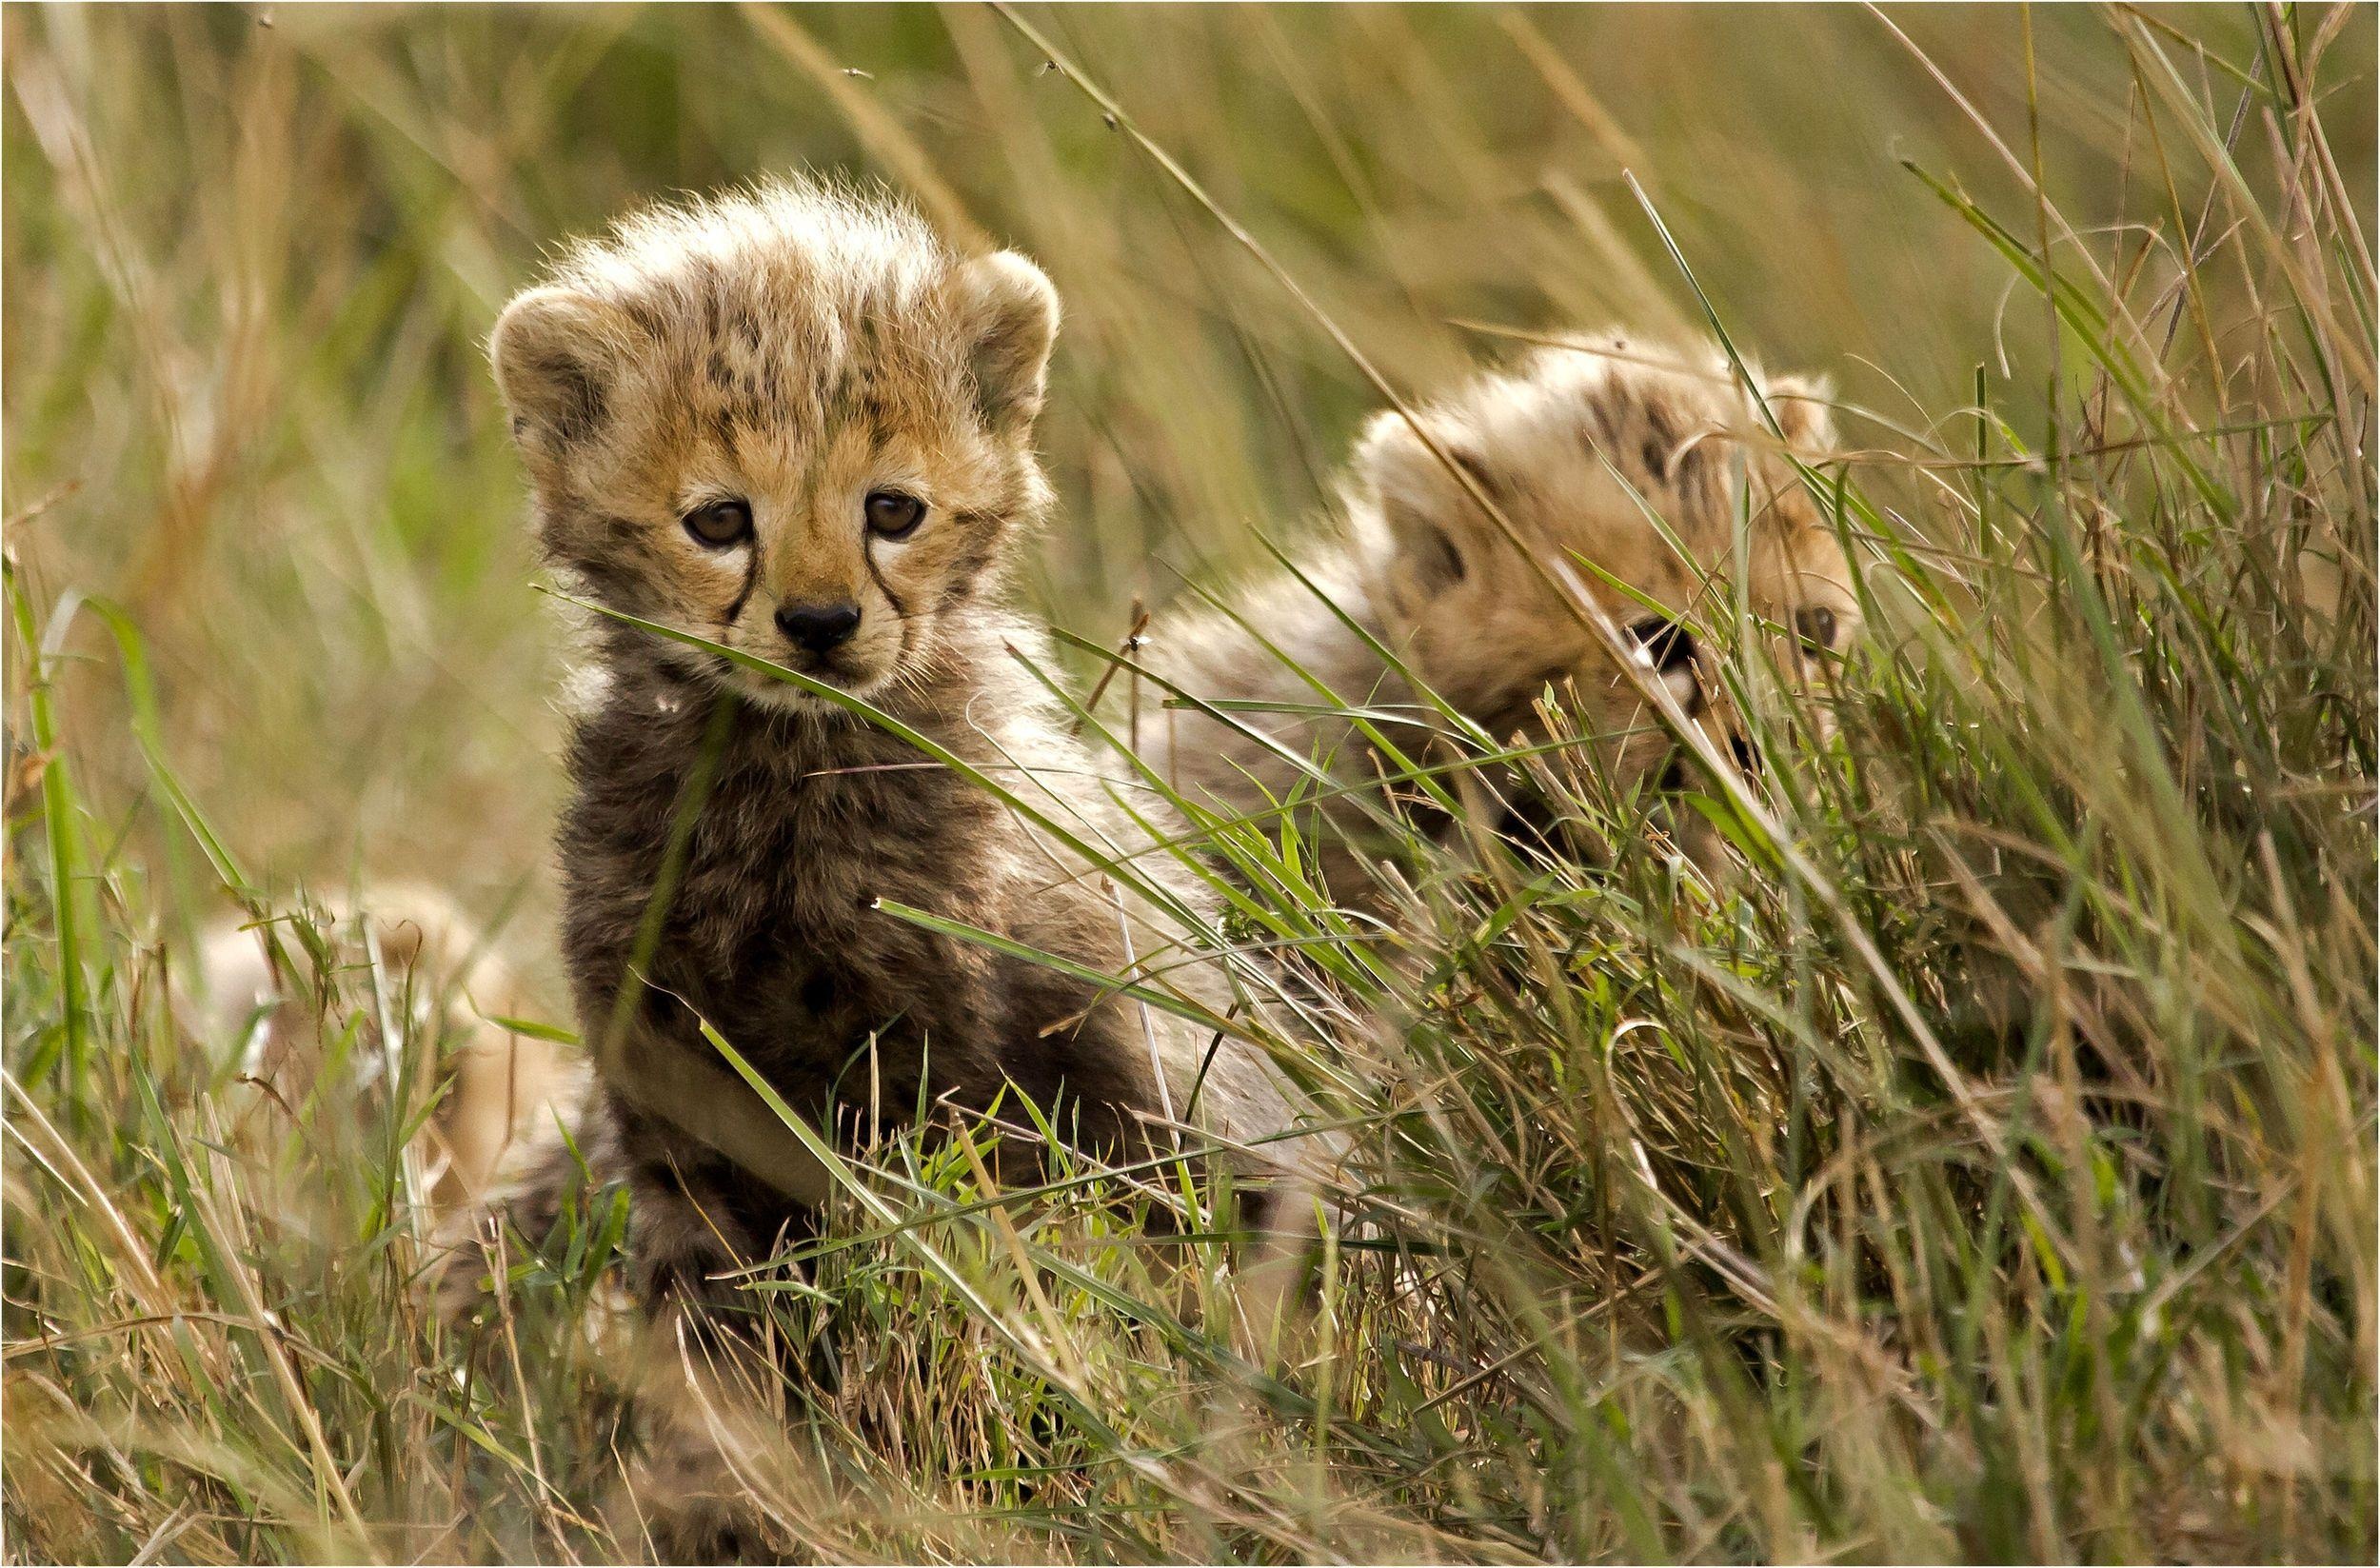 Cheetah cubs, Whiskers and paws, Little predators, Natural beauty, 2500x1650 HD Desktop